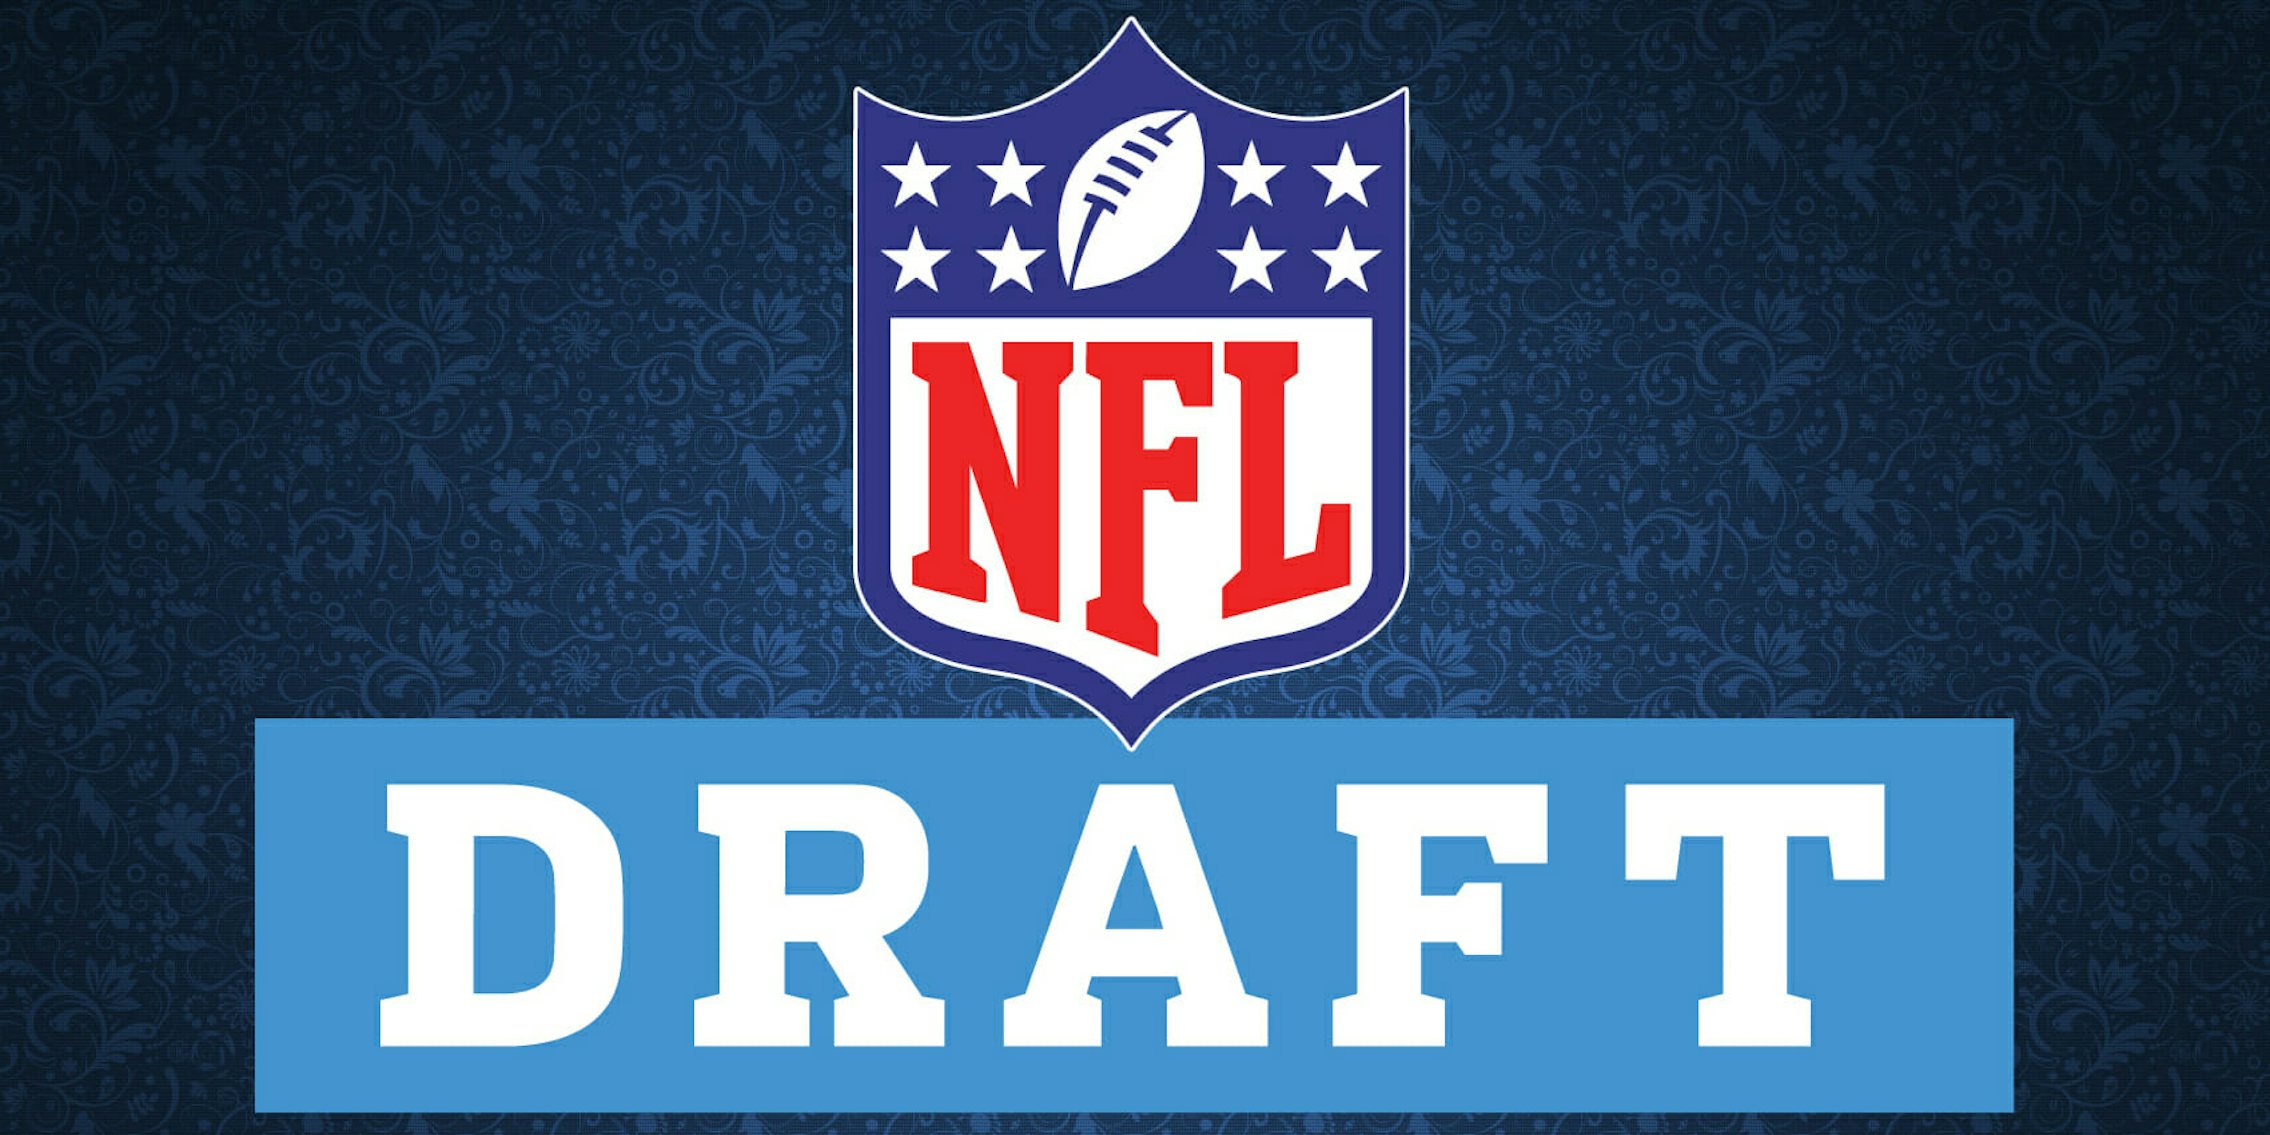 2019 NFL Draft Live Stream: Watch All 7 Rounds for Free